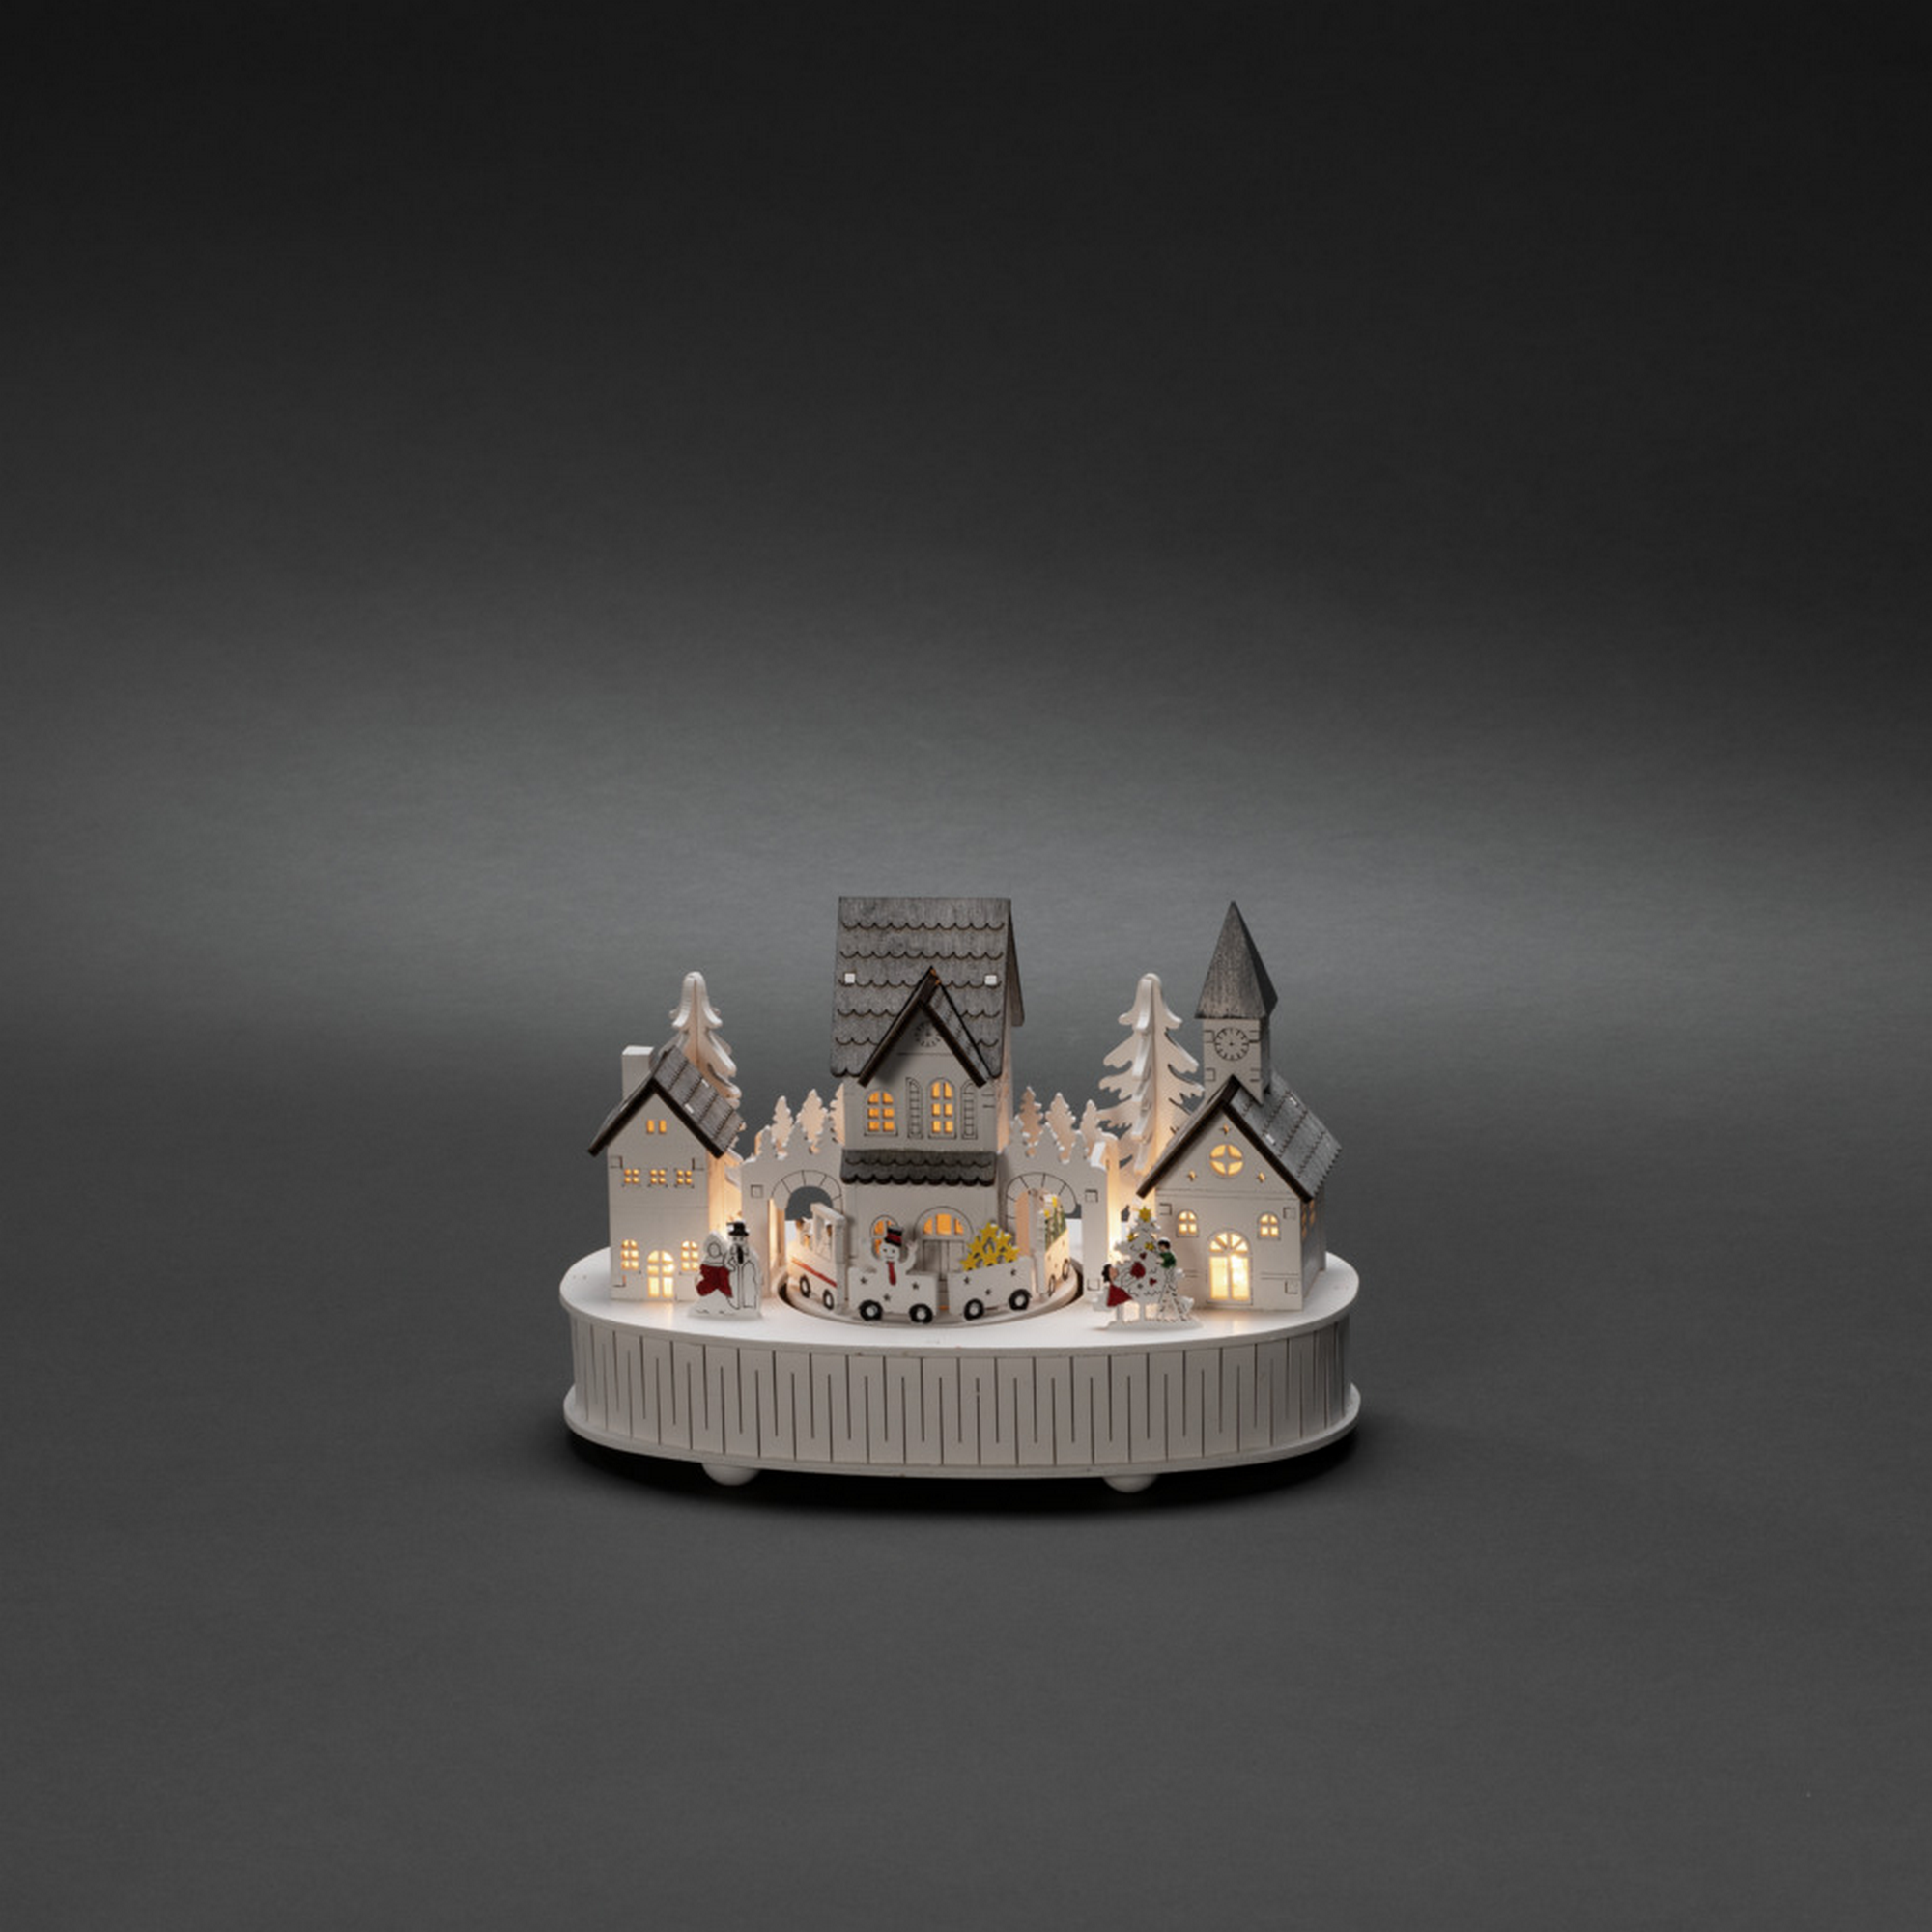 LED-Holzsilhouette 'Haus und Kirche' 5 LEDs warmweiß 22,7 x 12,7 cm + product picture